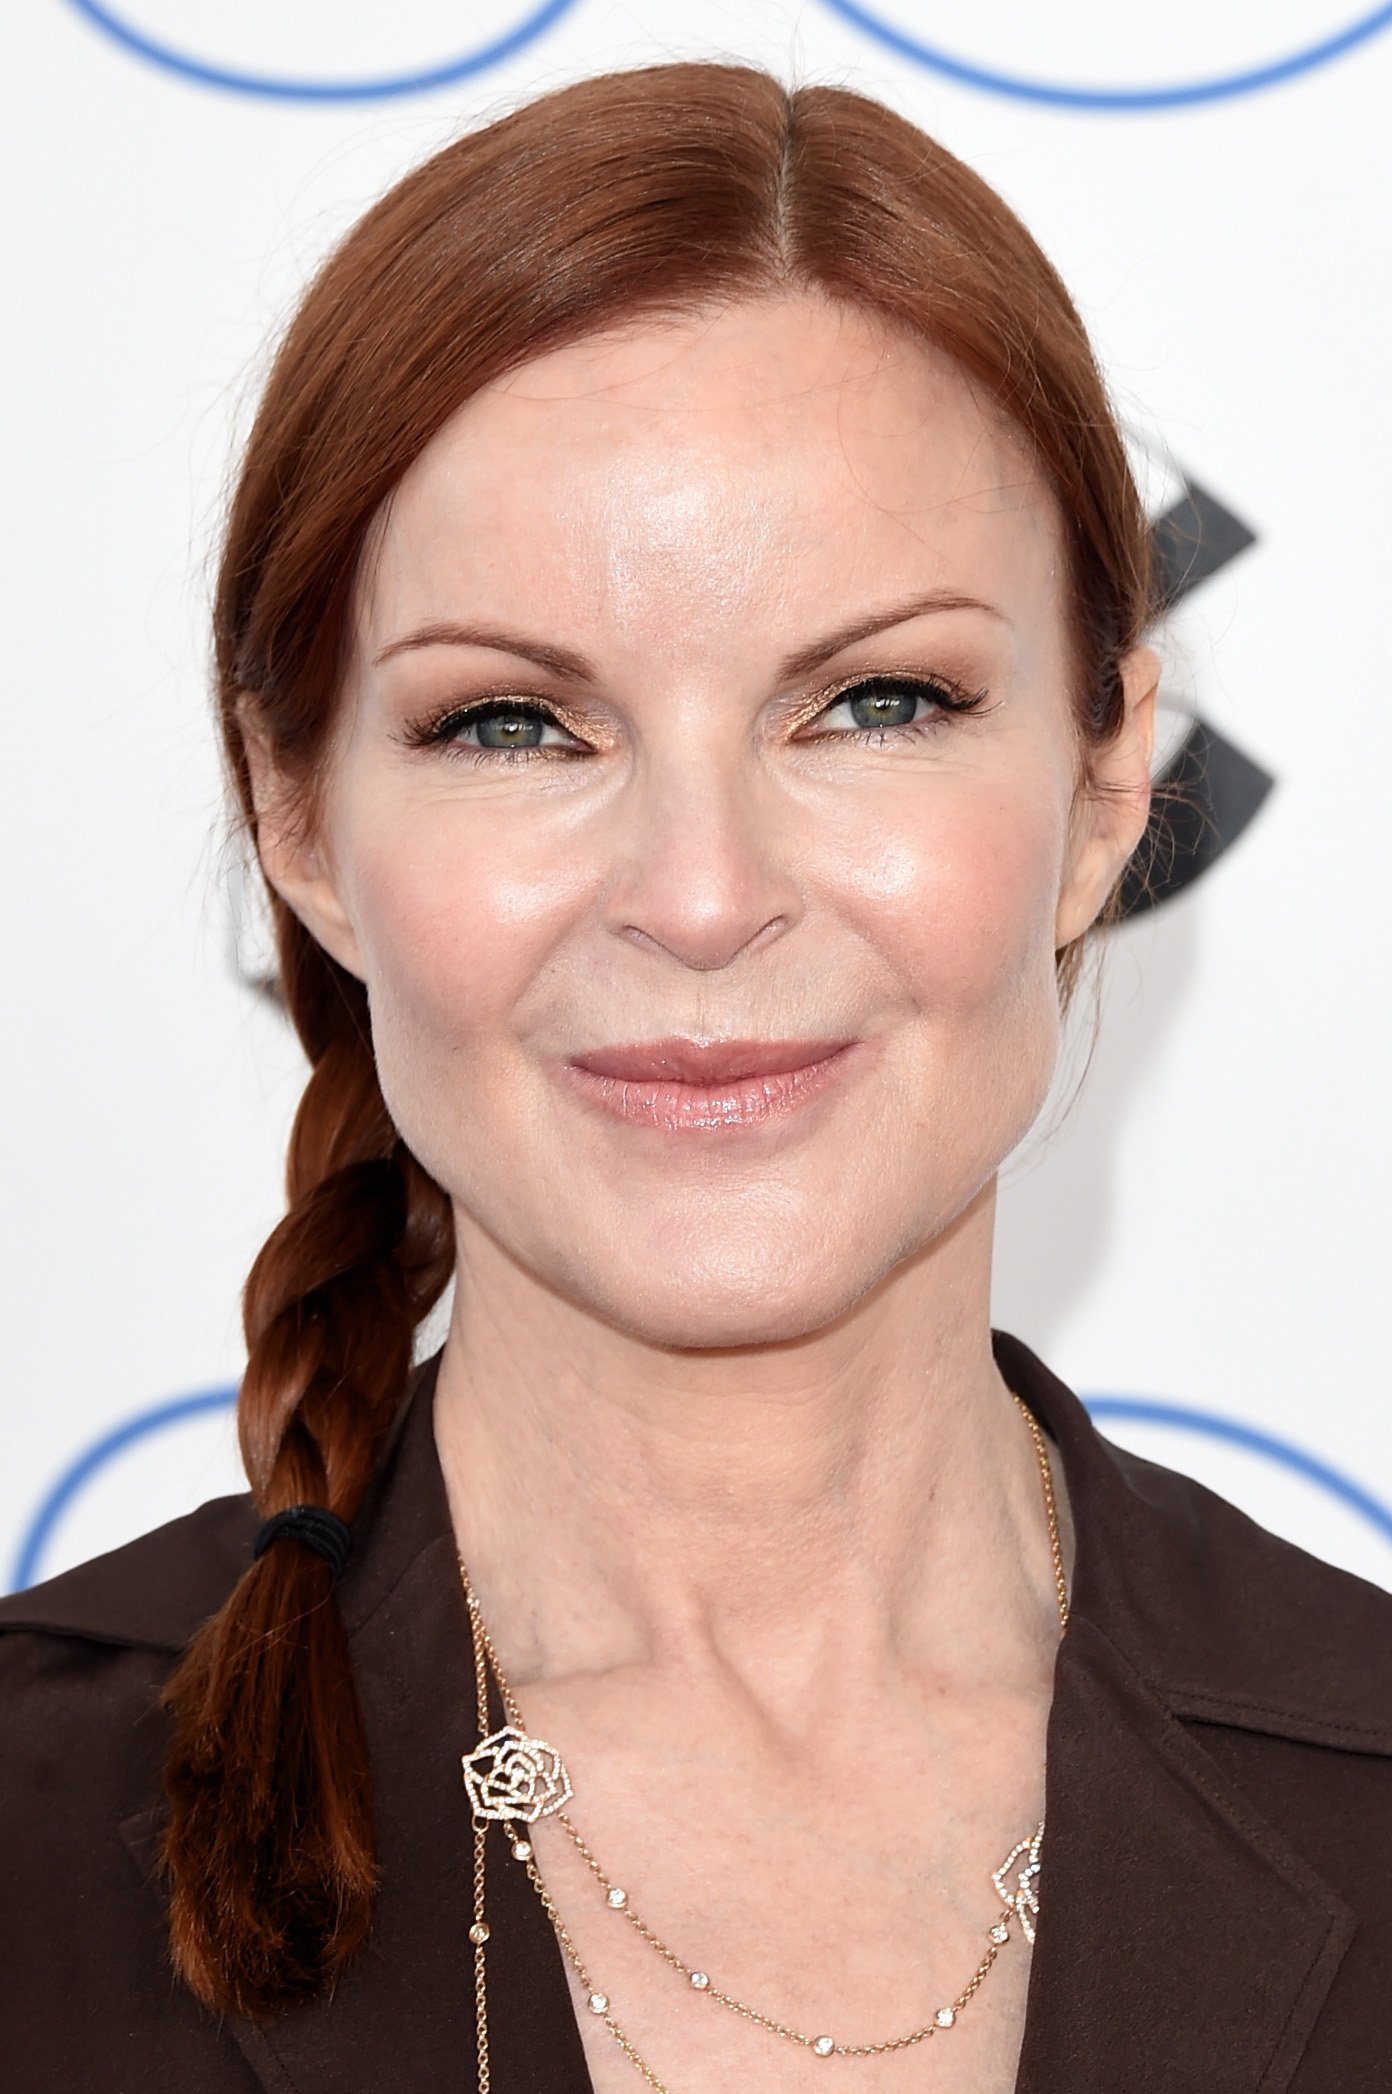 Marcia Cross attends the 2015 Film Independent Spirit Awards at Santa Monica Beach on February 21, 2015, in Santa Monica, California. | Source: Getty Images.